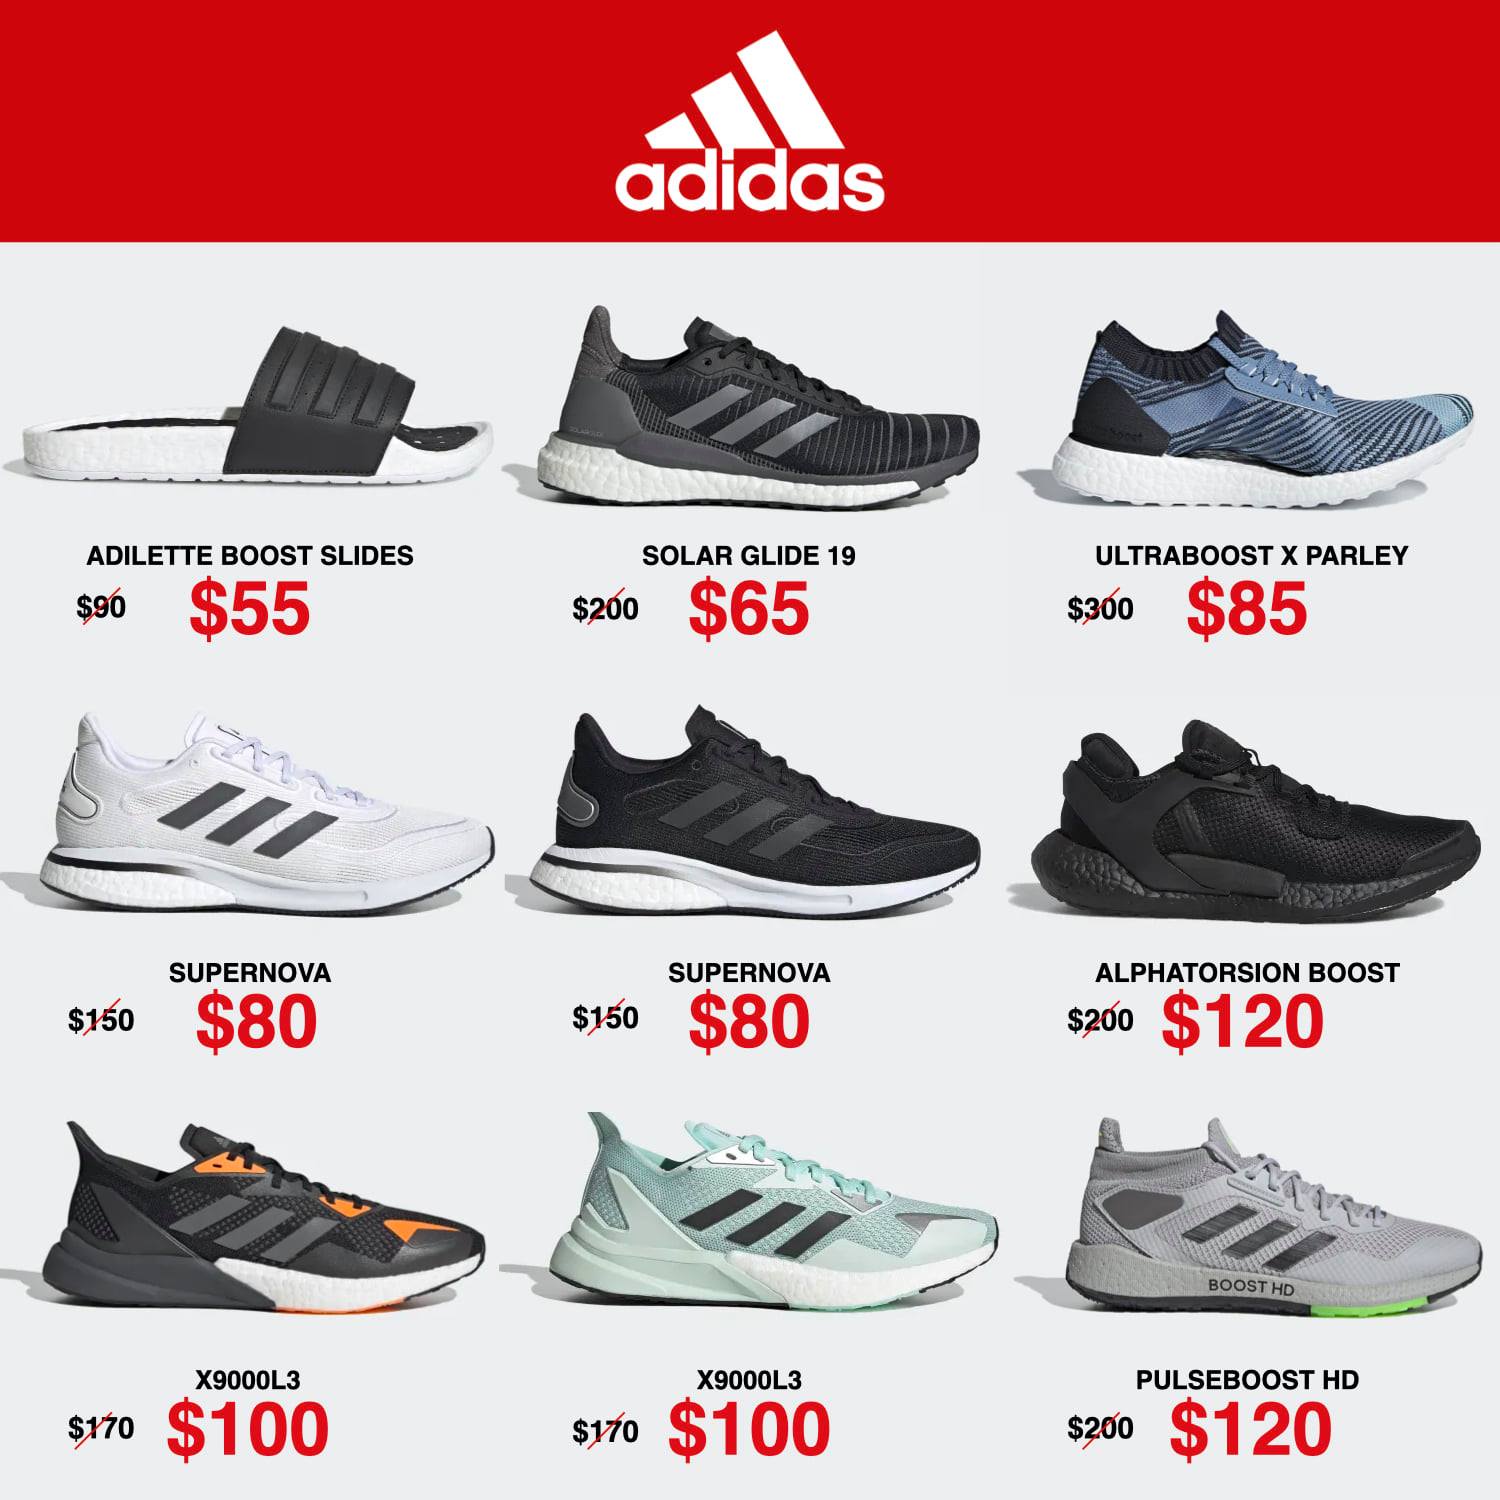 Redhill warehouse sale has up to 80% off Nike, Adidas, New Balance ...